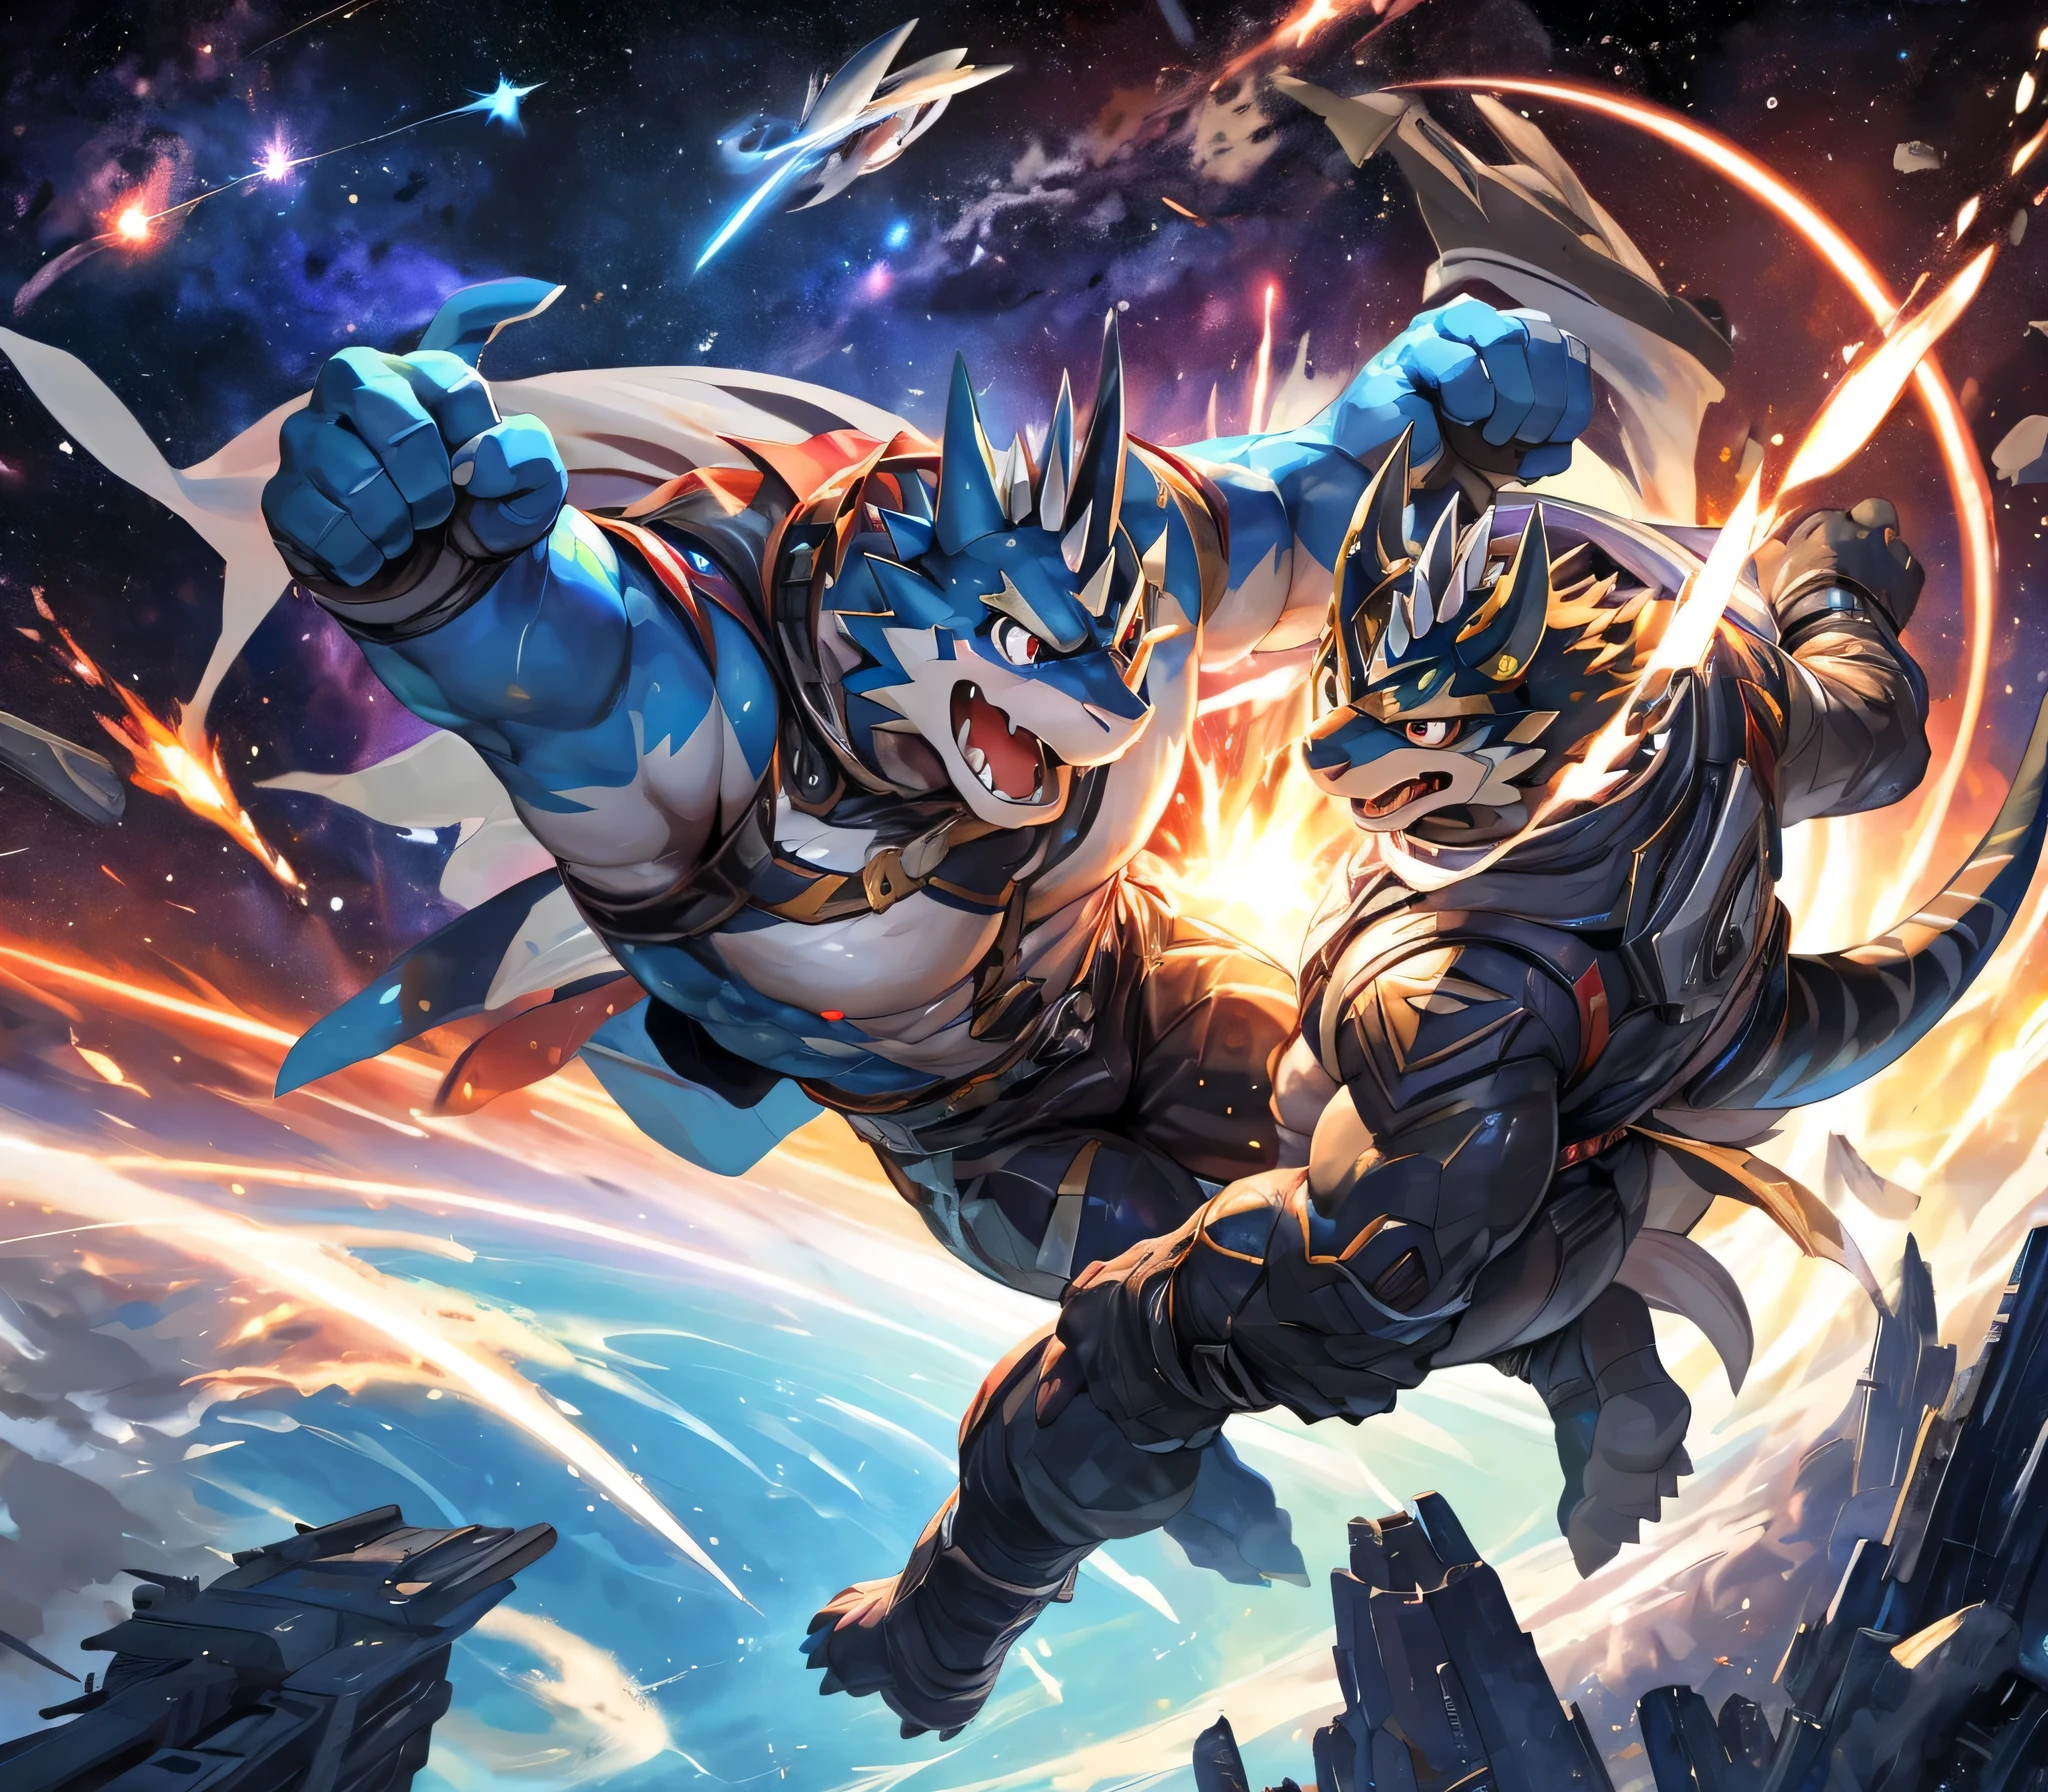 masterpiece,high quality,anime,detailed eyes, male, two characters, Ryekie: 1.1, Exveemon: 1.1, Ryekie and exveemon Fight alongside together, Great physique,strong arms manly, Battlefield, Battle, War Airplanes, Space, Blackhole, Casual suit, Star explode, (Colorful Spark), Shimmering Space, Joyful, by null-ghost,by pino daeni